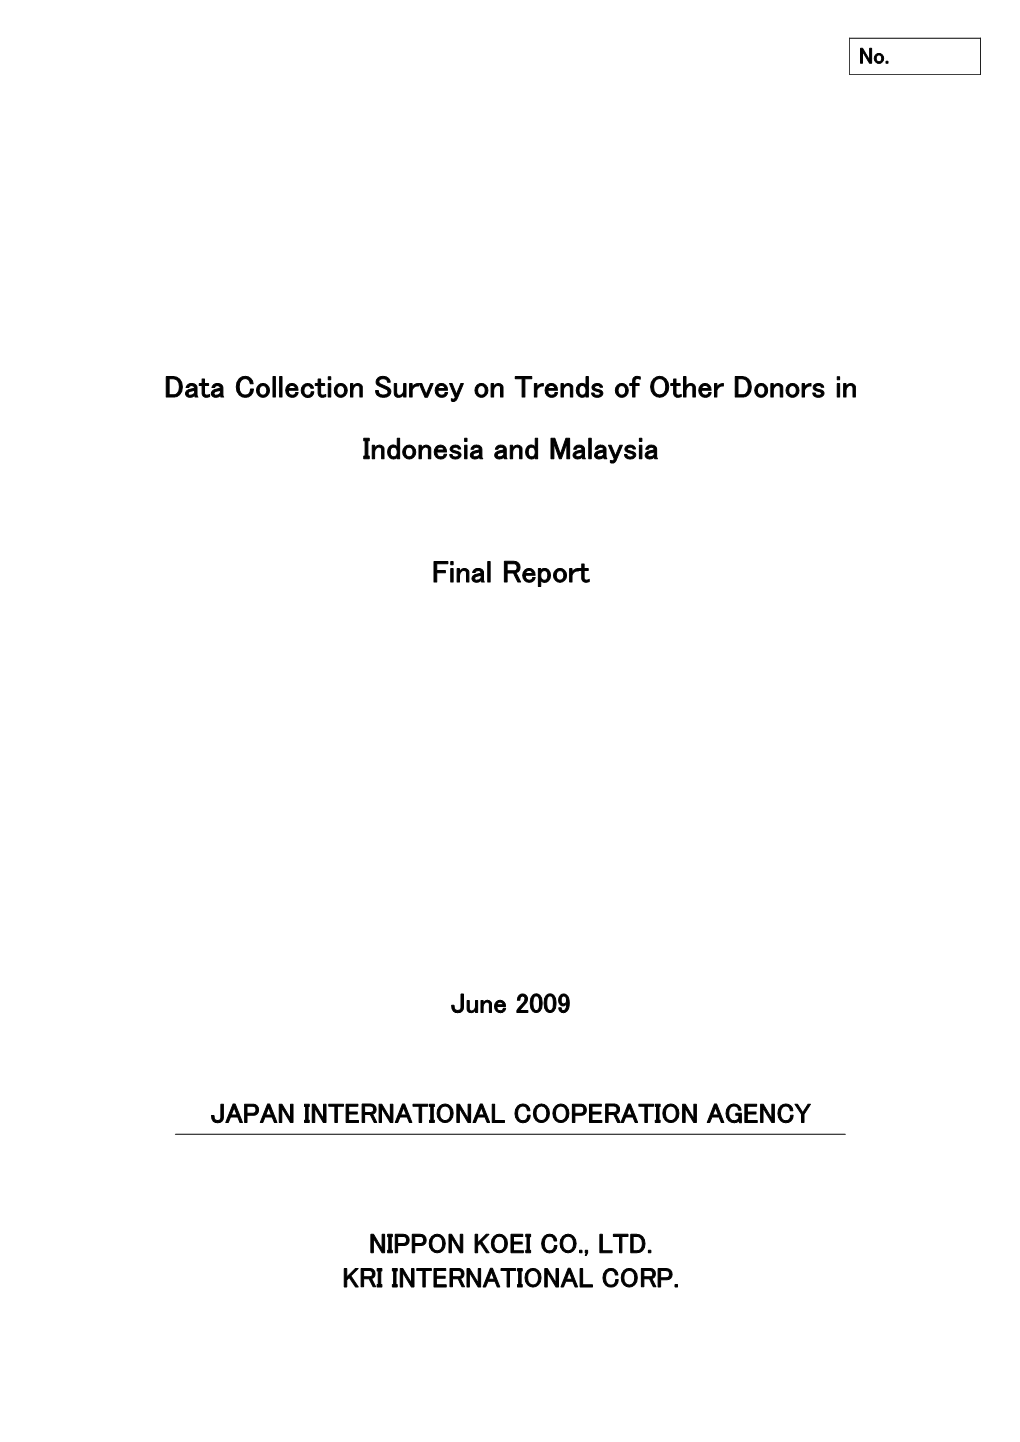 Data Collection Survey on Trends of Other Donors in Indonesia and Malaysia